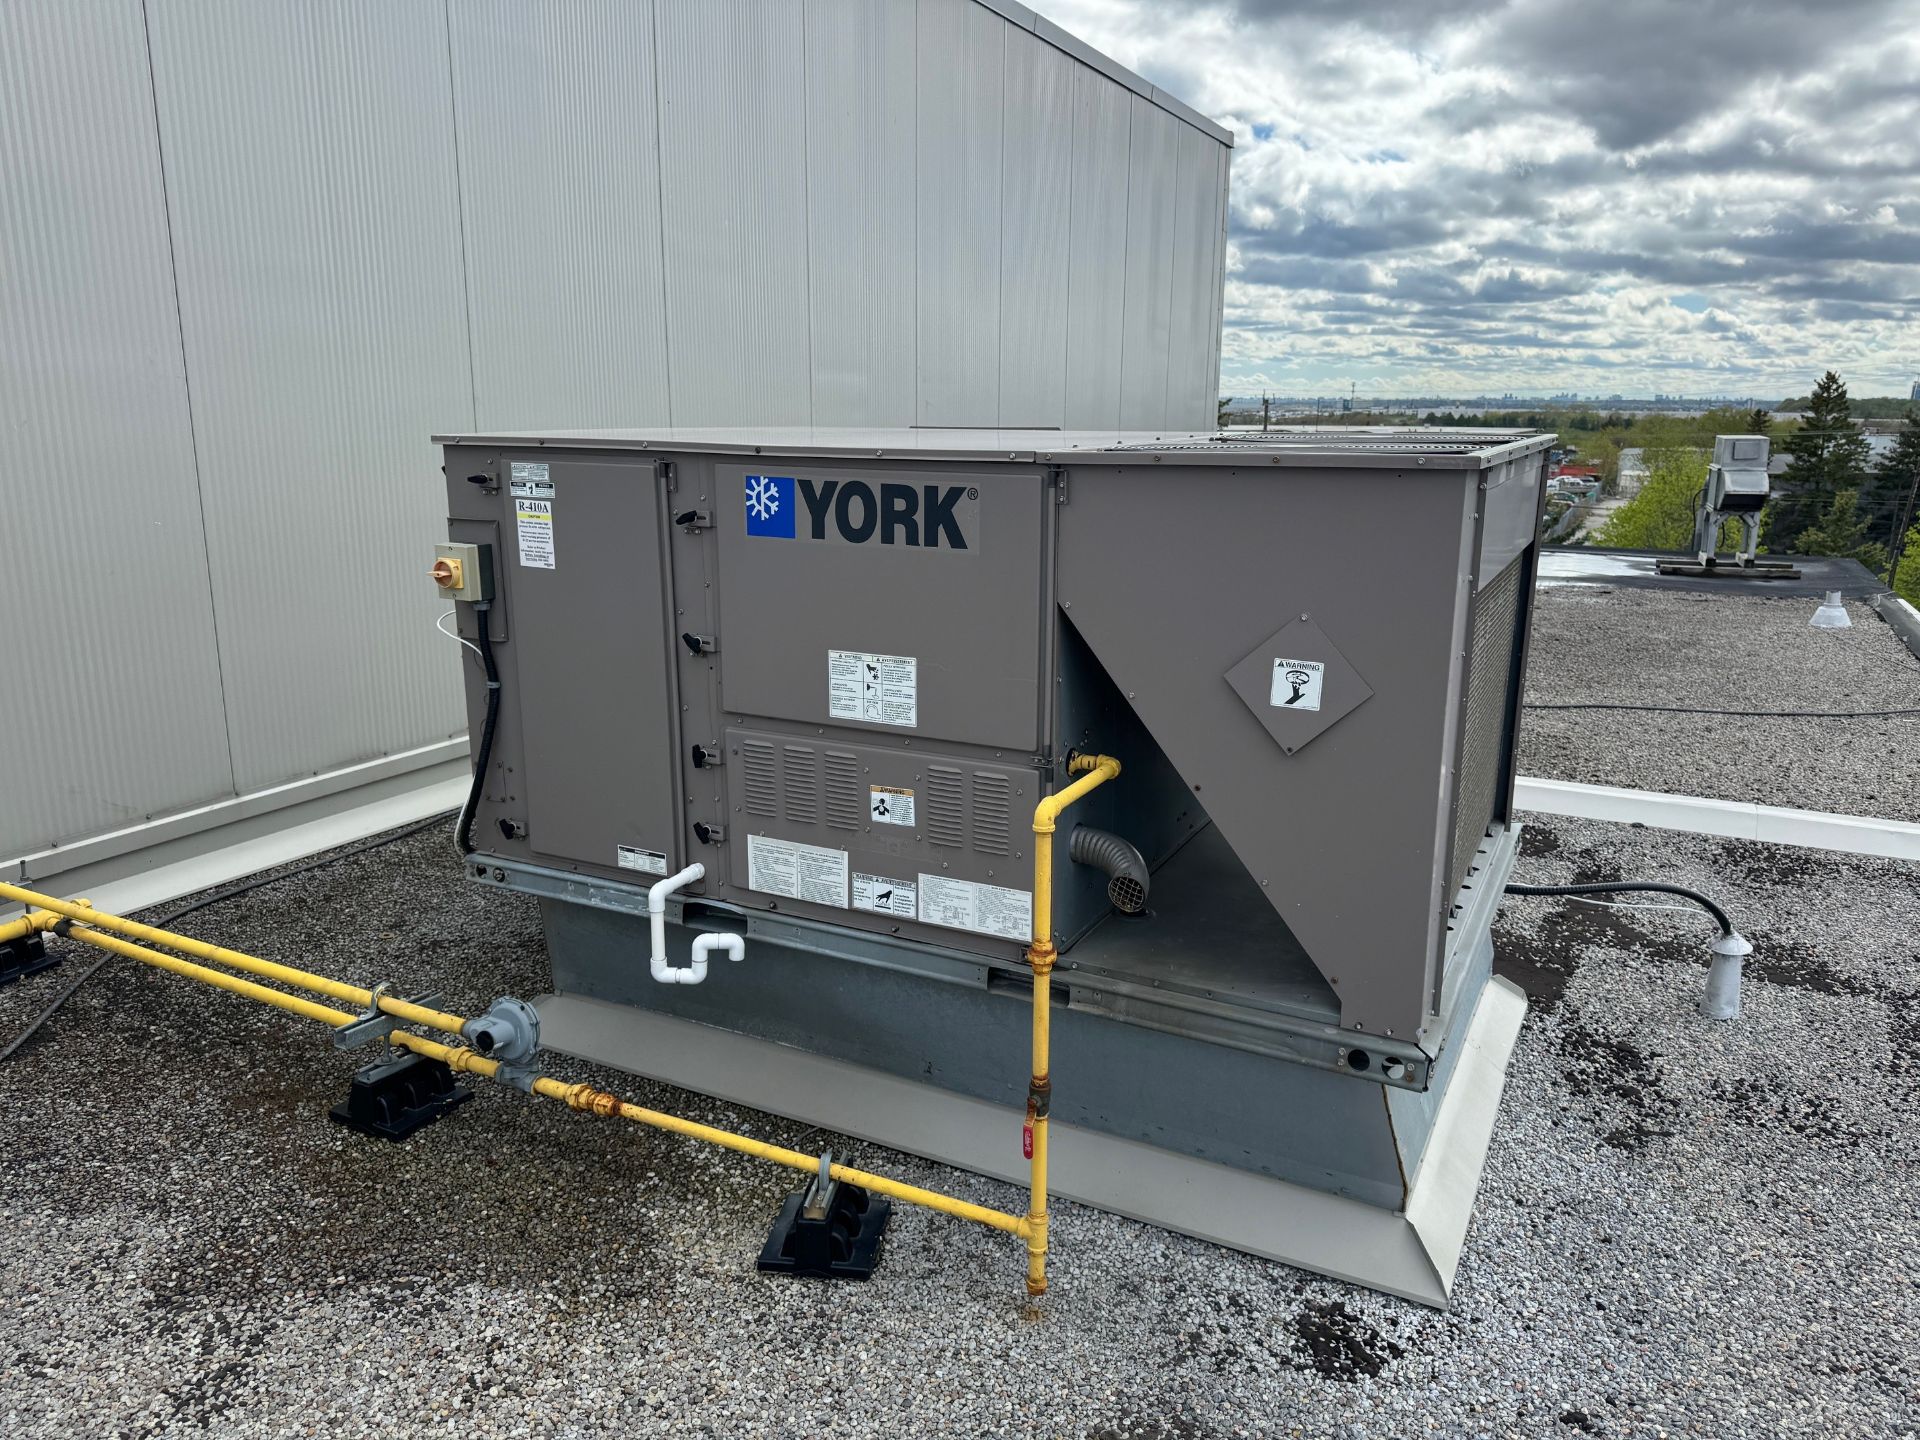 YORK ZF090N15N5AAA5A ROOFTOP AIR CONDITIONING UNIT, S/N N1B4454170, 575-3-60, NATURAL GAS, 180,000